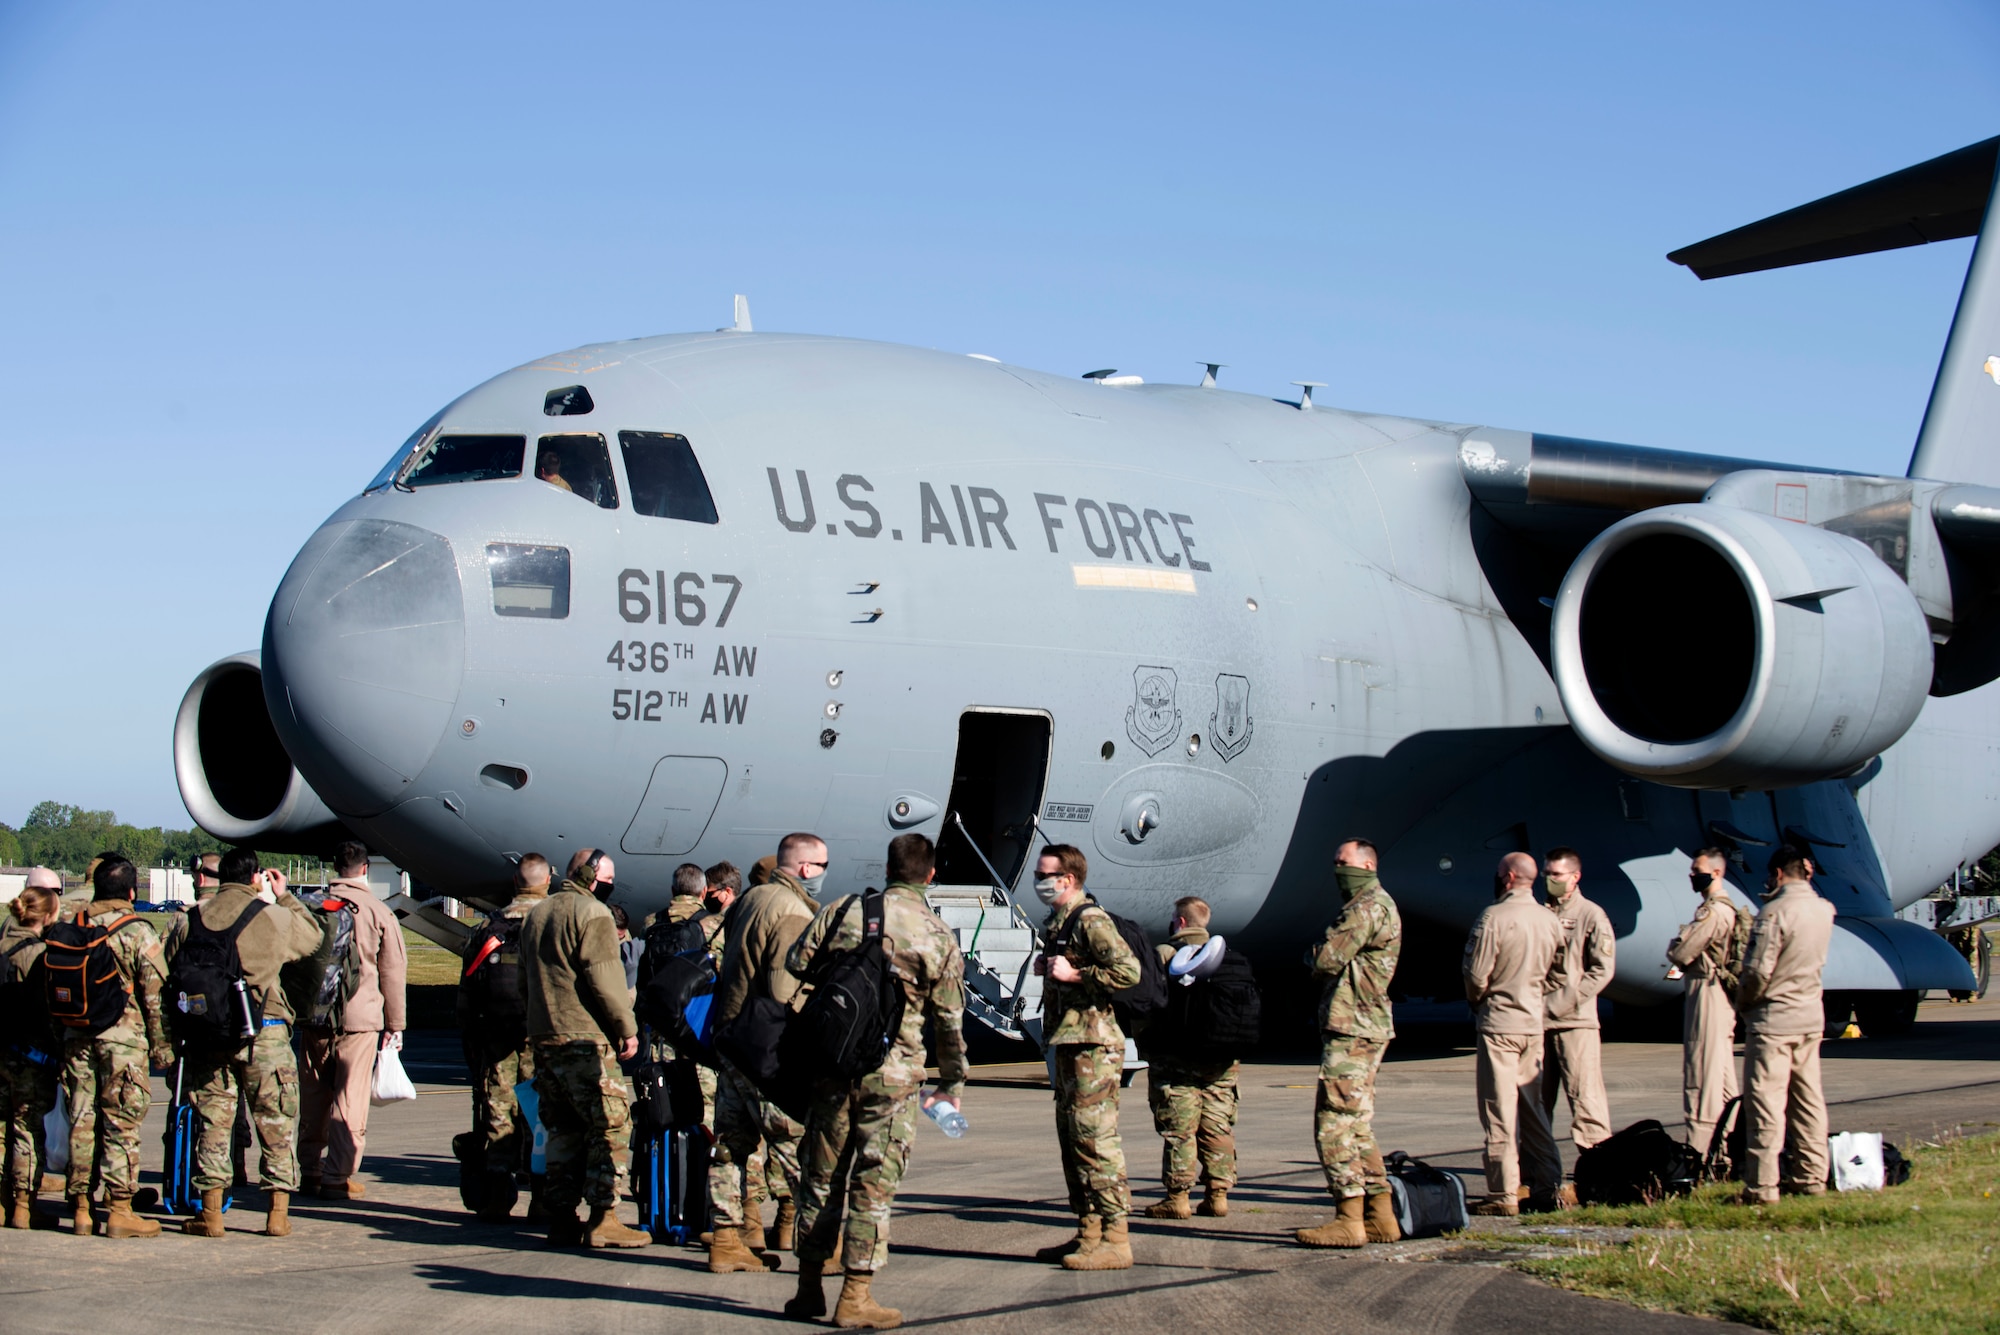 48th Fighter Wing Airmen wait to board a C-17 Globemaster III from Dover Air Force Base, Delaware, prior to a deployment from Royal Air Force Lakenheath, England, May 6, 2020. F-15E Strike Eagles and Airmen from the 492nd Fighter Squadron and supporting units across the 48th FW are currently deployed to an undisclosed location in Southwest Asia. (U.S. Air Force photo by Senior Airman Christopher S. Sparks)